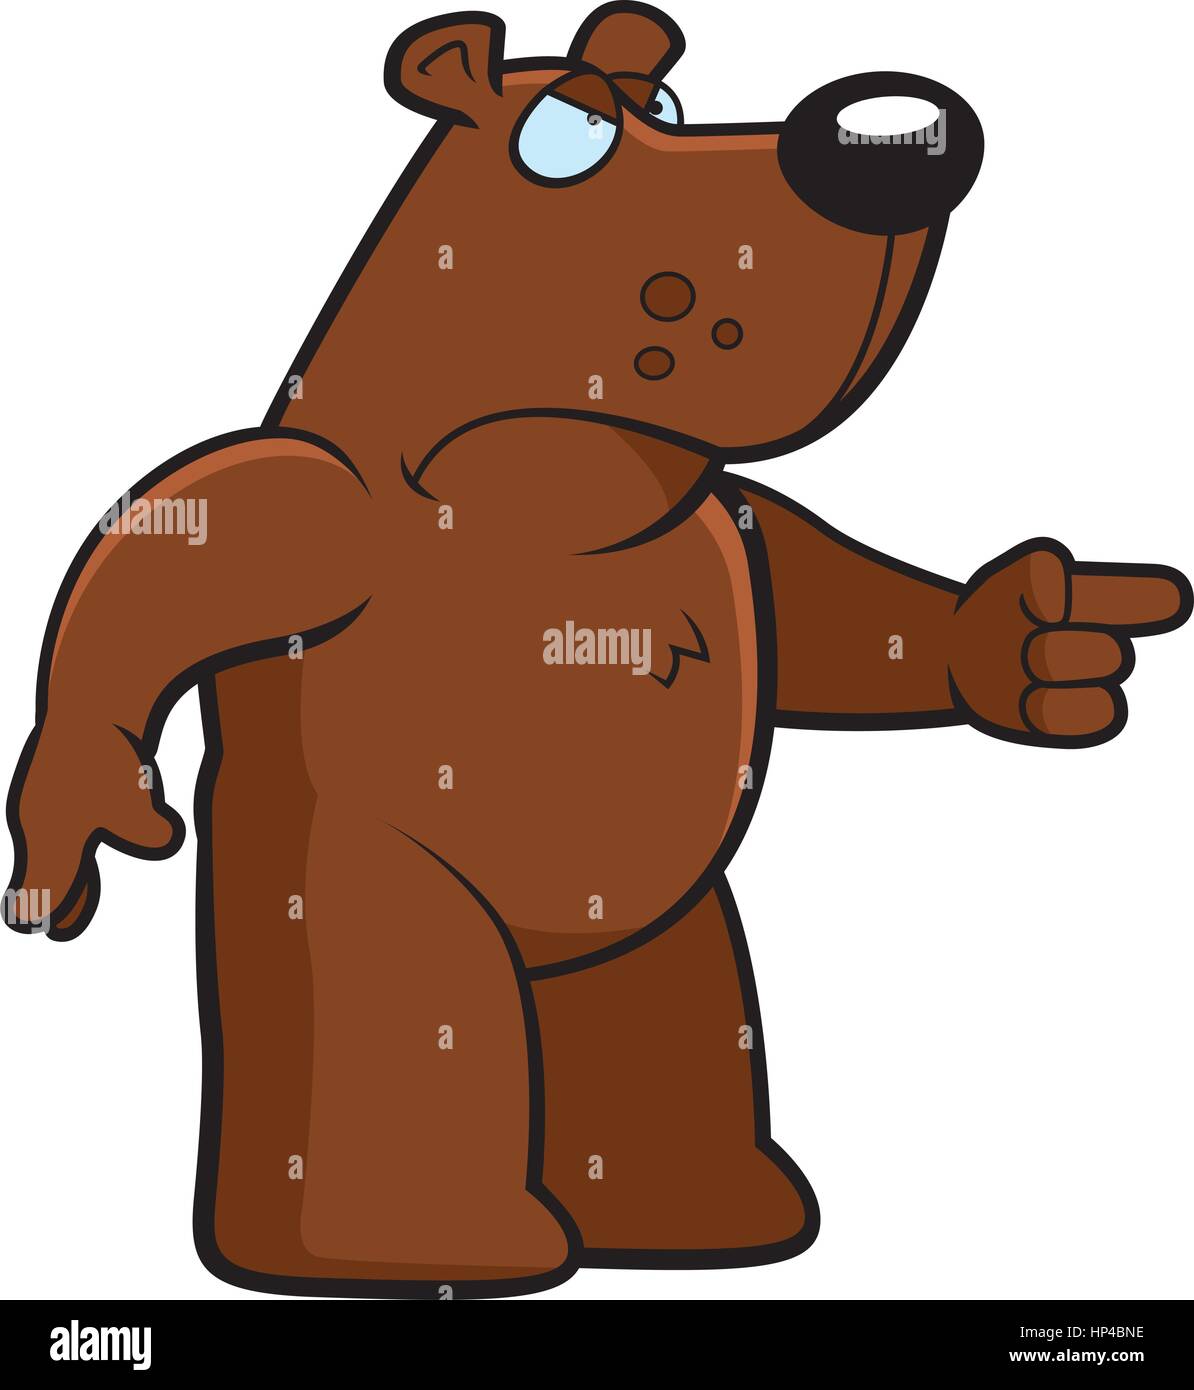 Angry Grizzly Bear Cartoon